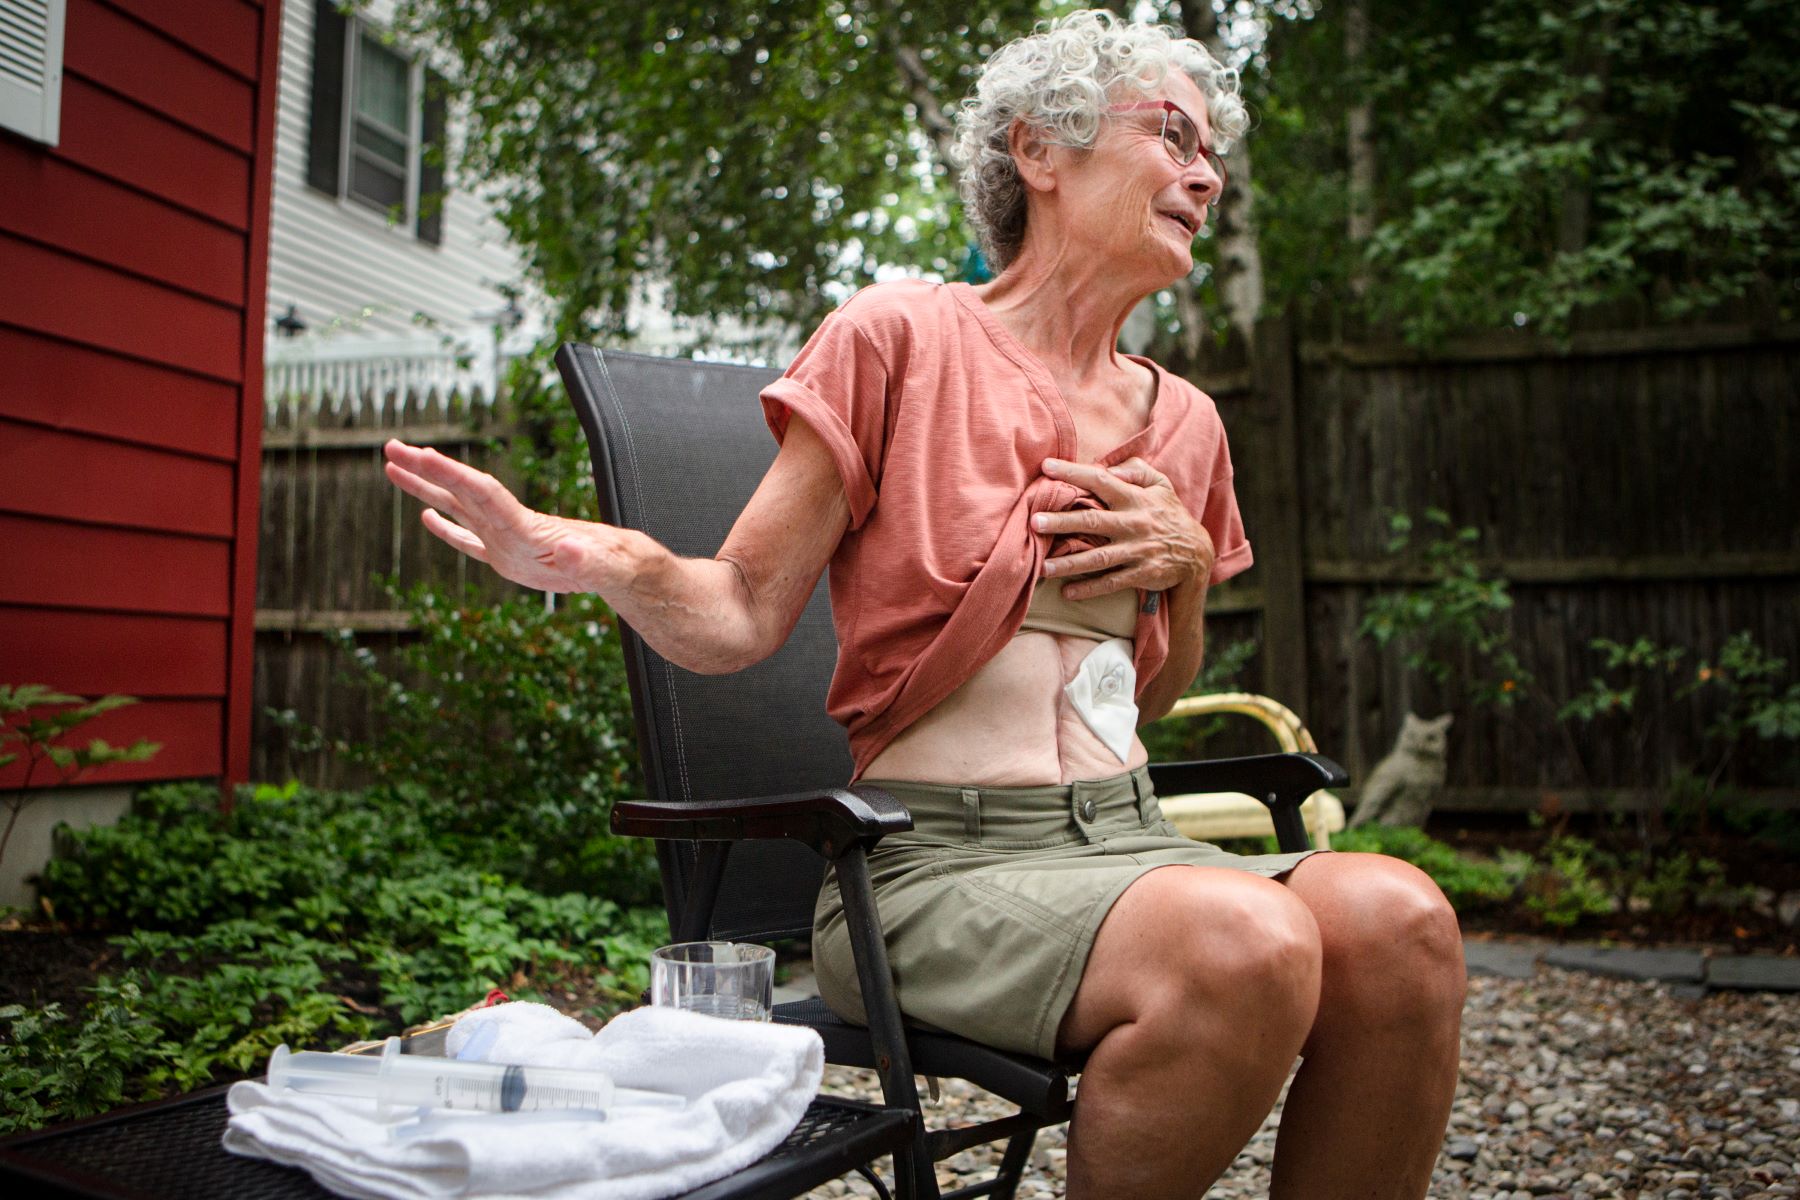 While sitting in a chair in her backyard, Karen Worth lifts up her shirt to show a deep belly scar and feeding port.